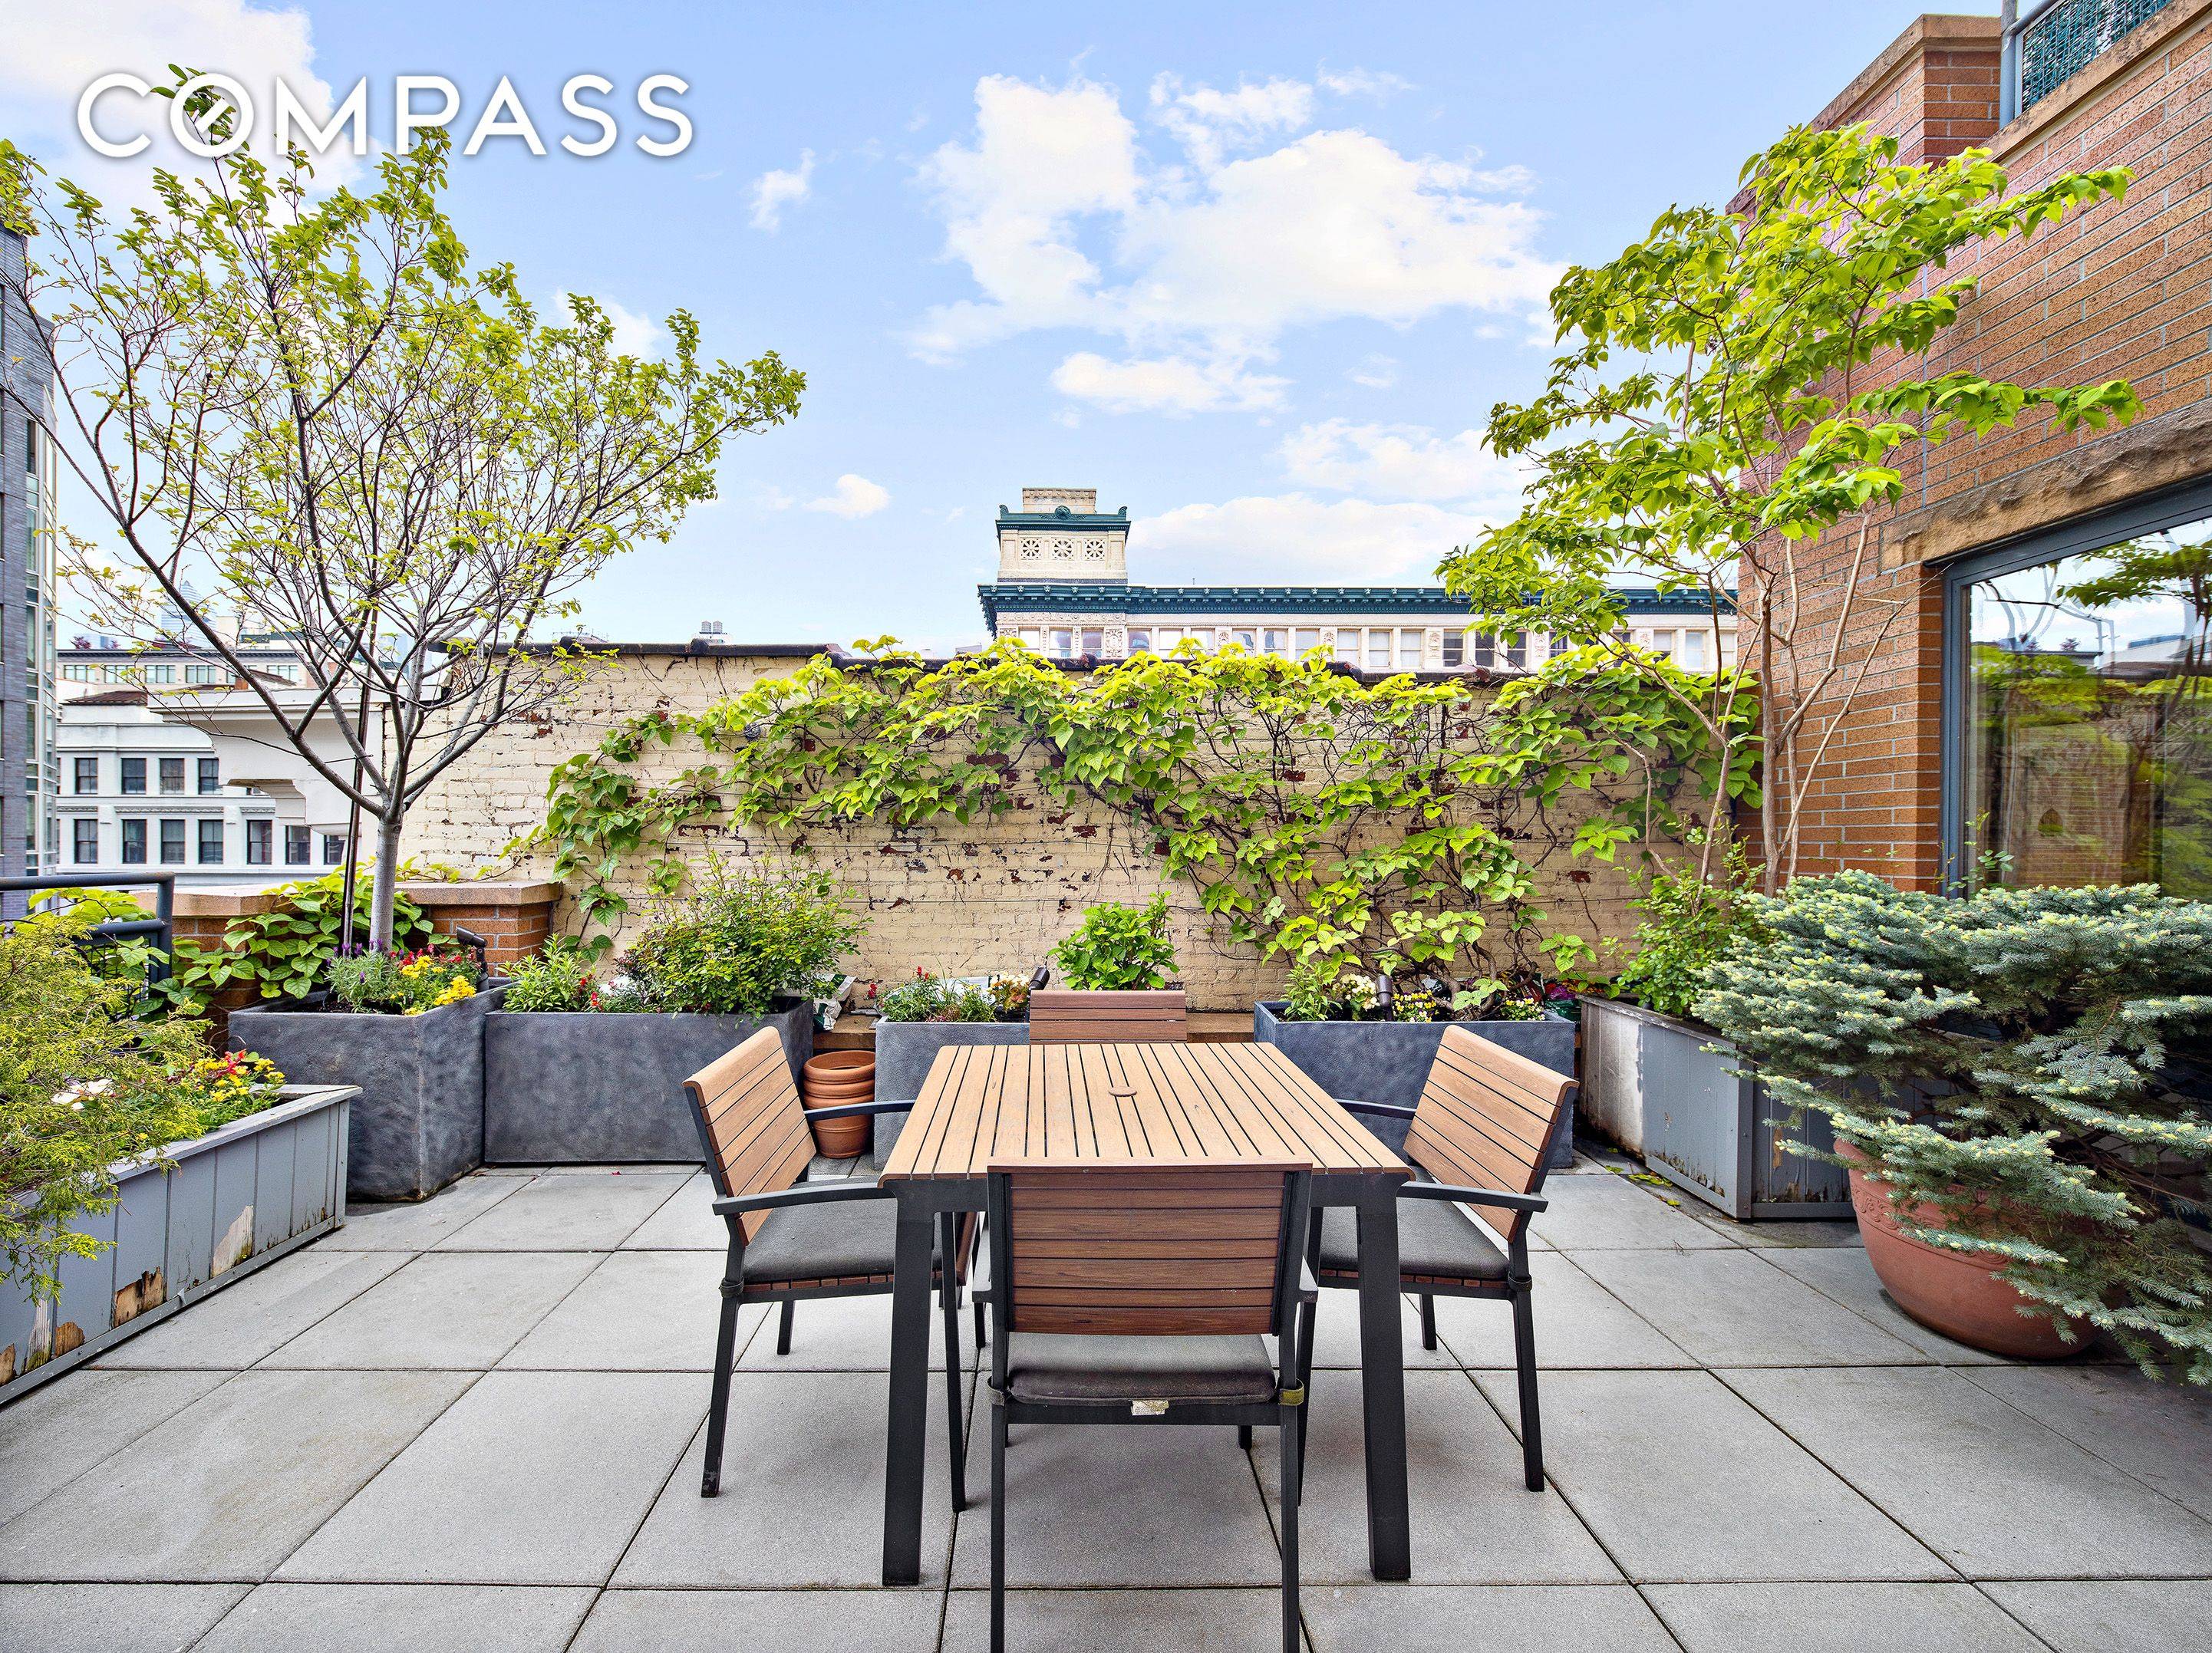 Conveniently positioned at the intersection of Chelsea, The Flatiron District, Union Square, and Greenwich Village, this beautifully scaled 2 3 bedroom condo beauty boasts wonderful light and views through large ...